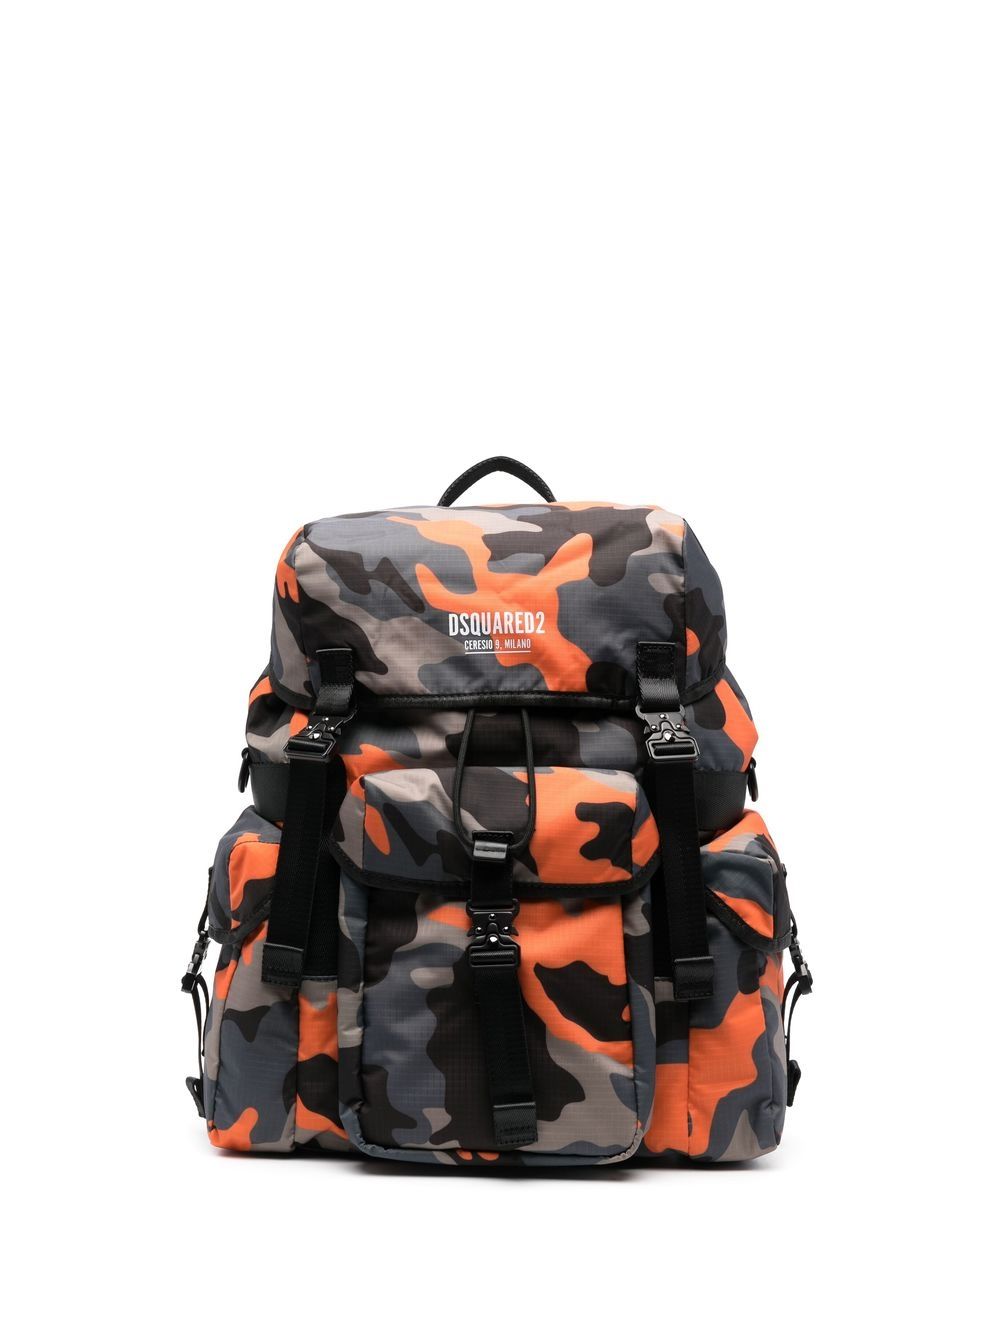 Dsquared2 Ceresio 9 camouflage-print Backpack - Farfetch